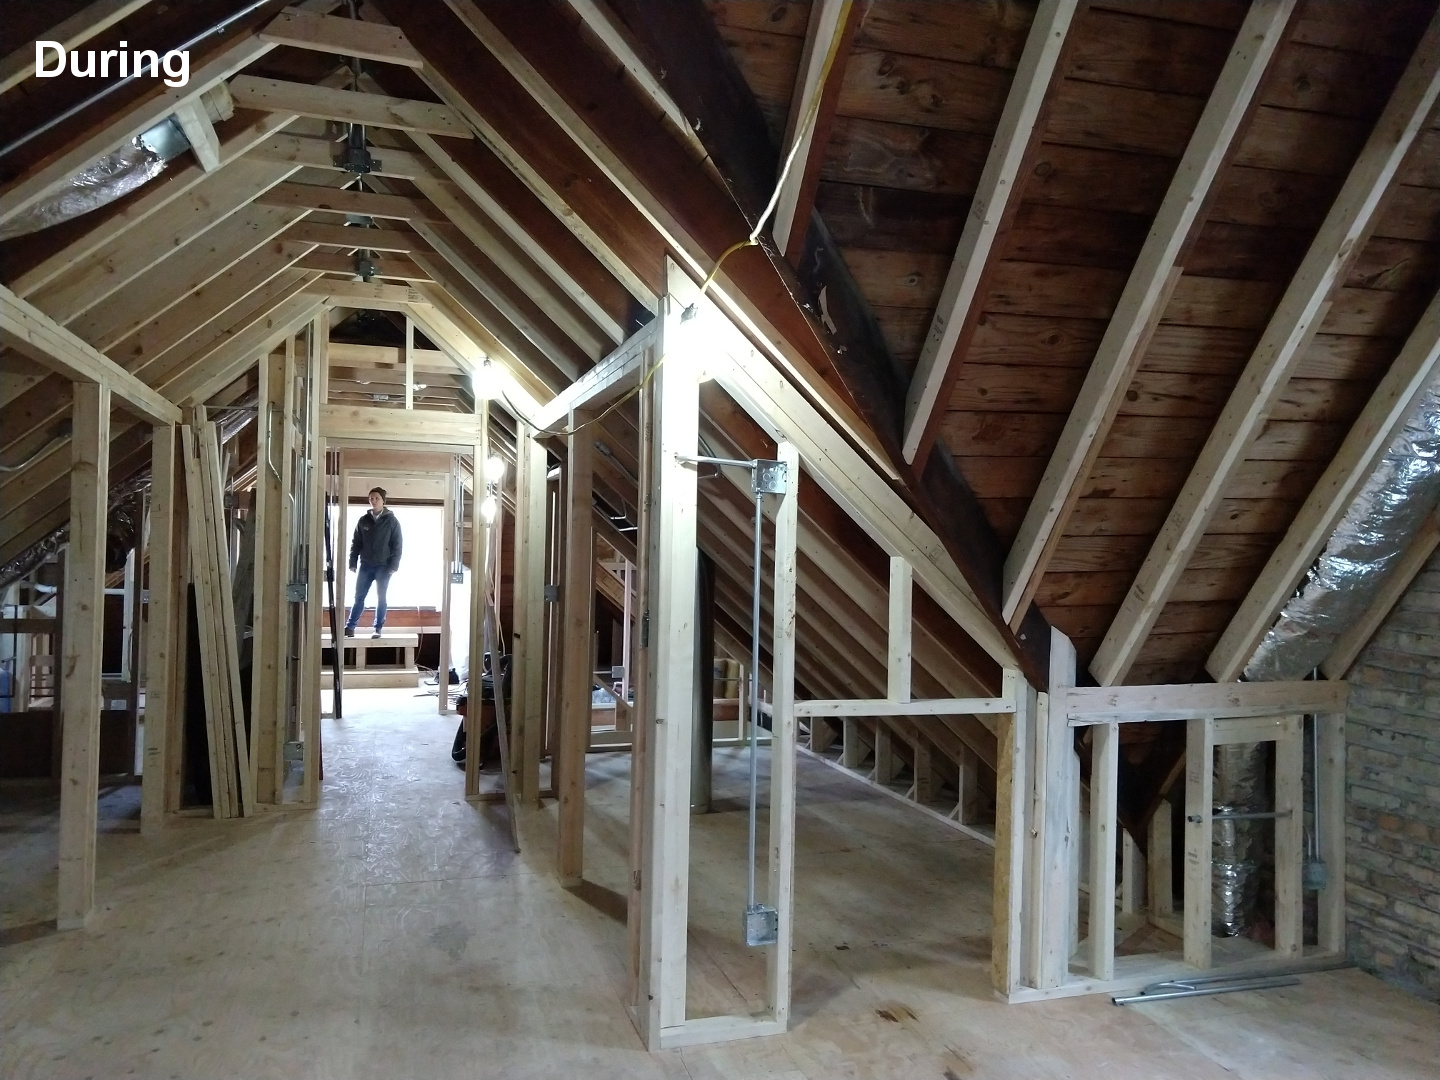 Chicago Attic Conversion Vaulted Roof During Construction